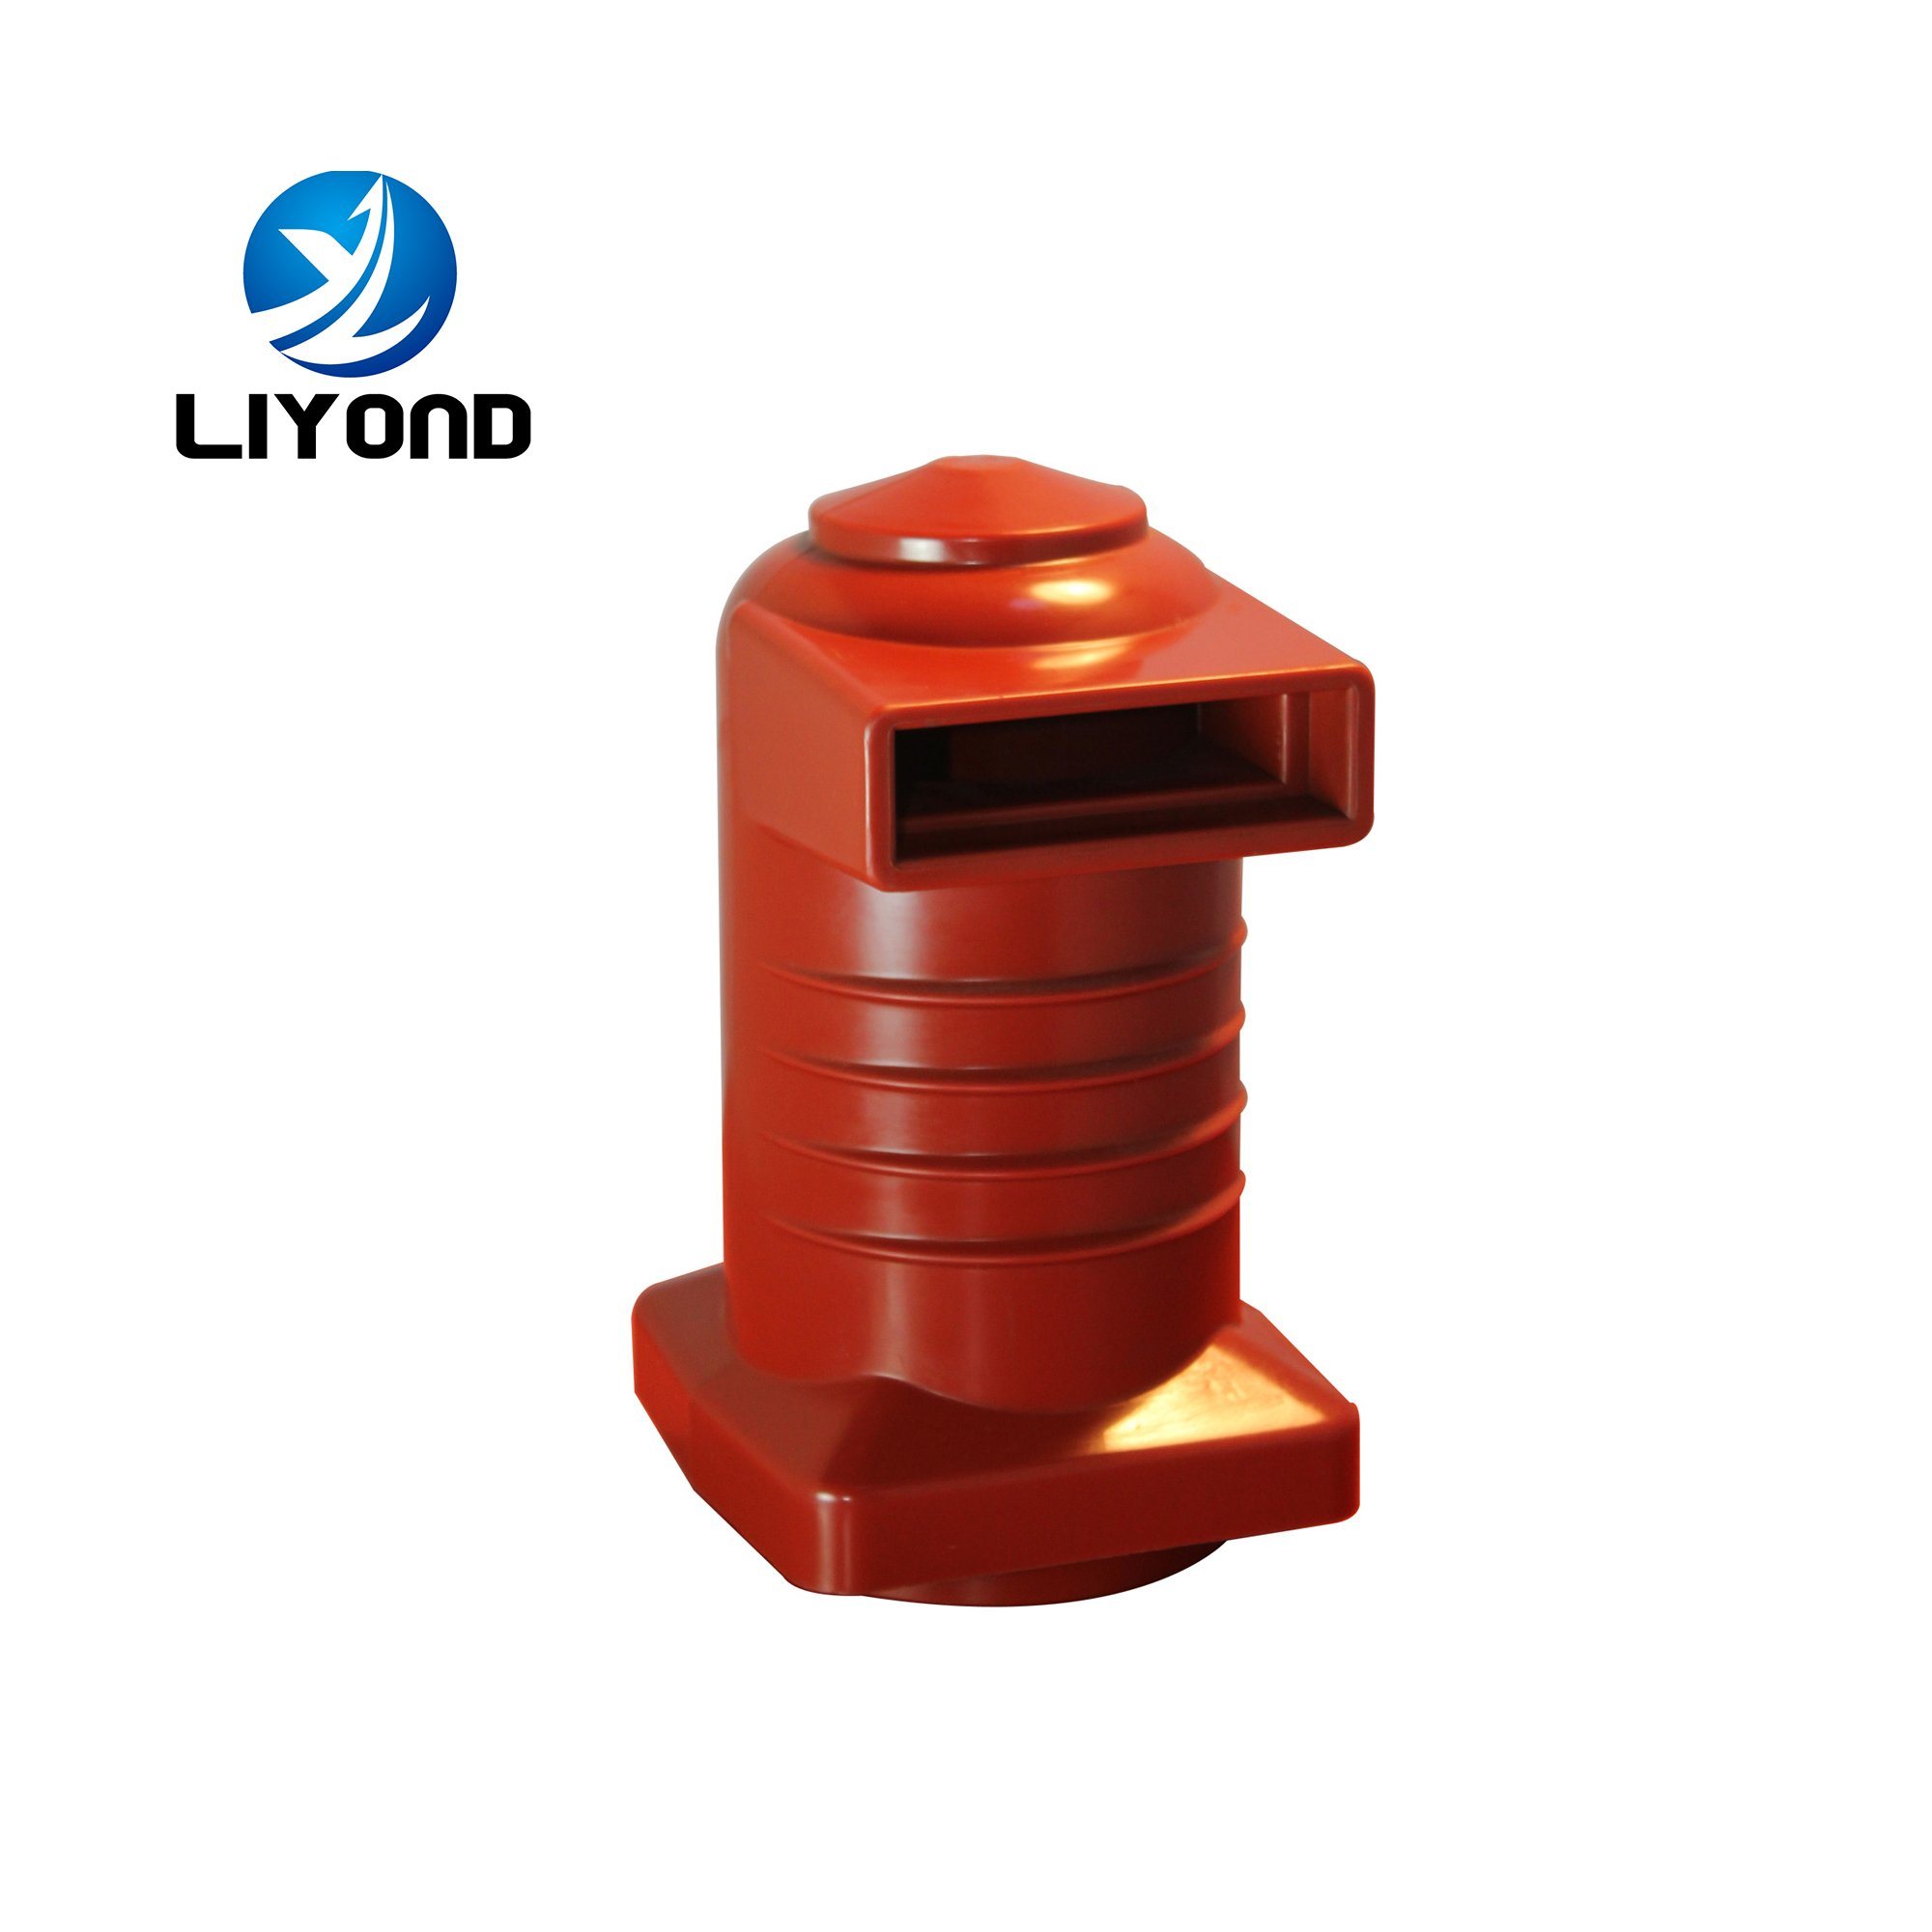 Ly101 10kv 12kv High Voltage Epoxy Resin 630A Insulated Contact Box Forswitchgear